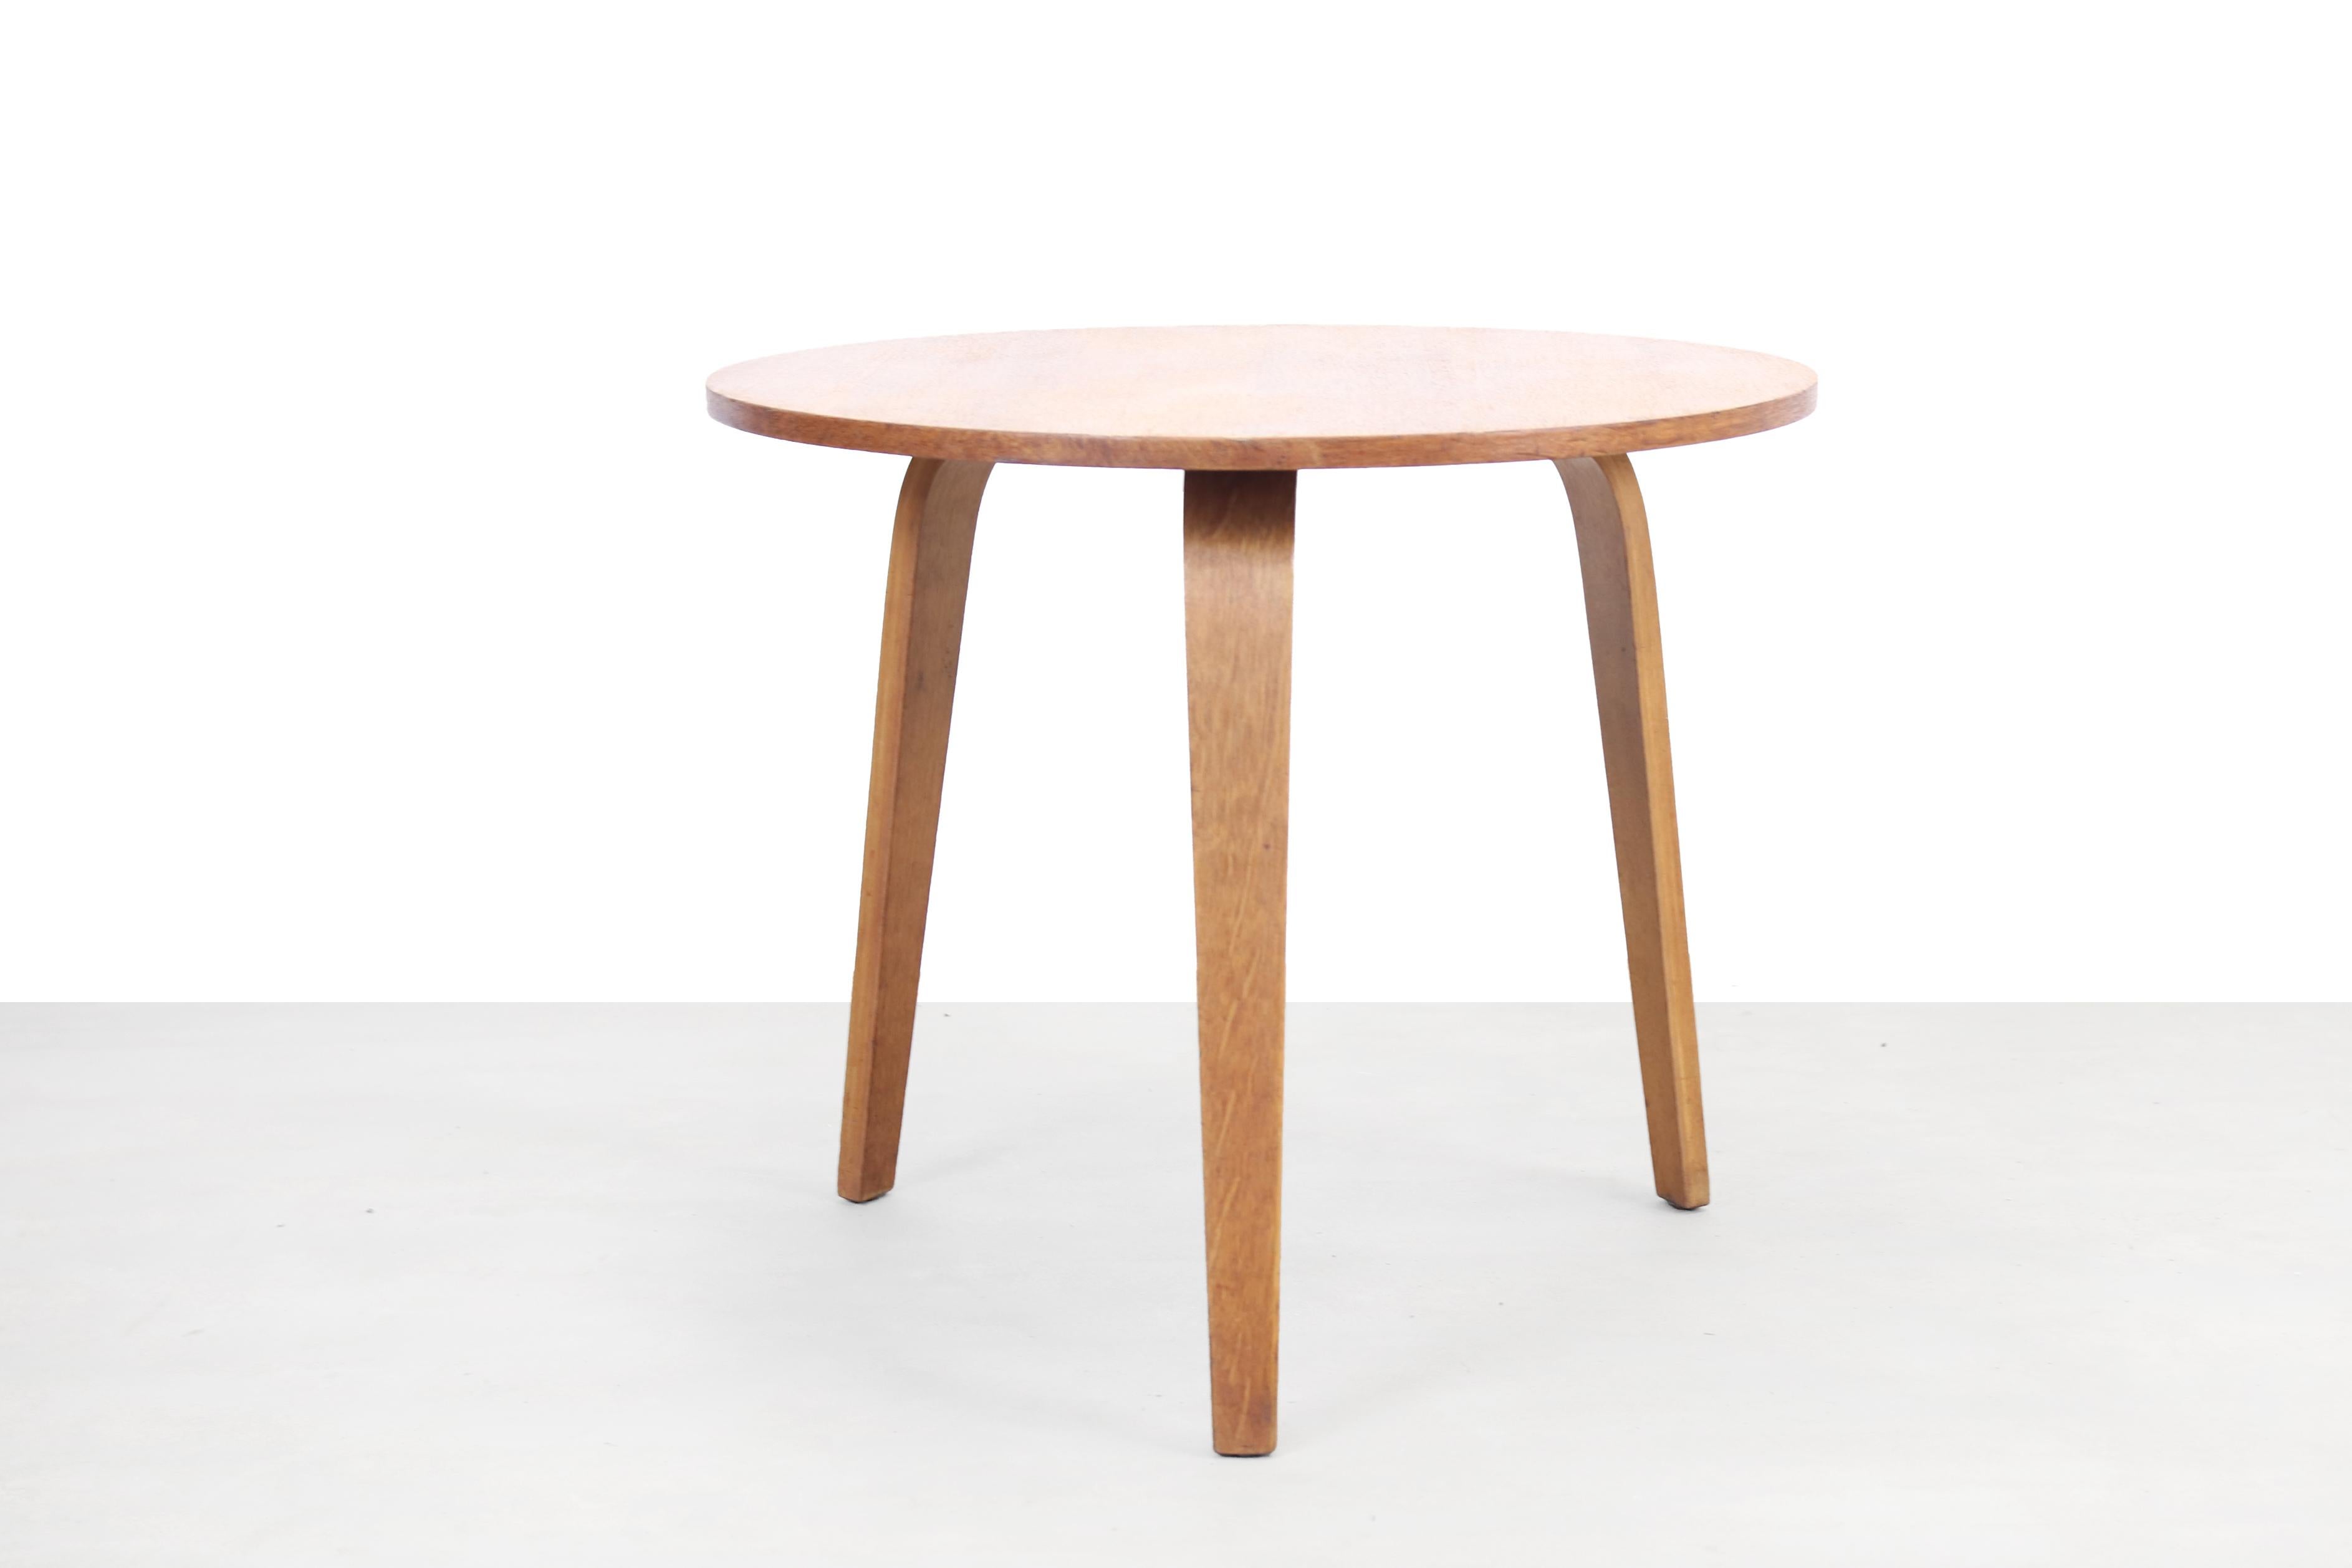 This coffee table was designed by the Dutch designer Cees Braakman for Pastoe in the 1950s. The tabletop is made of oak veneer and stands on three beautiful curved plywood legs. This table can be used as a coffee table, but also as a side table for